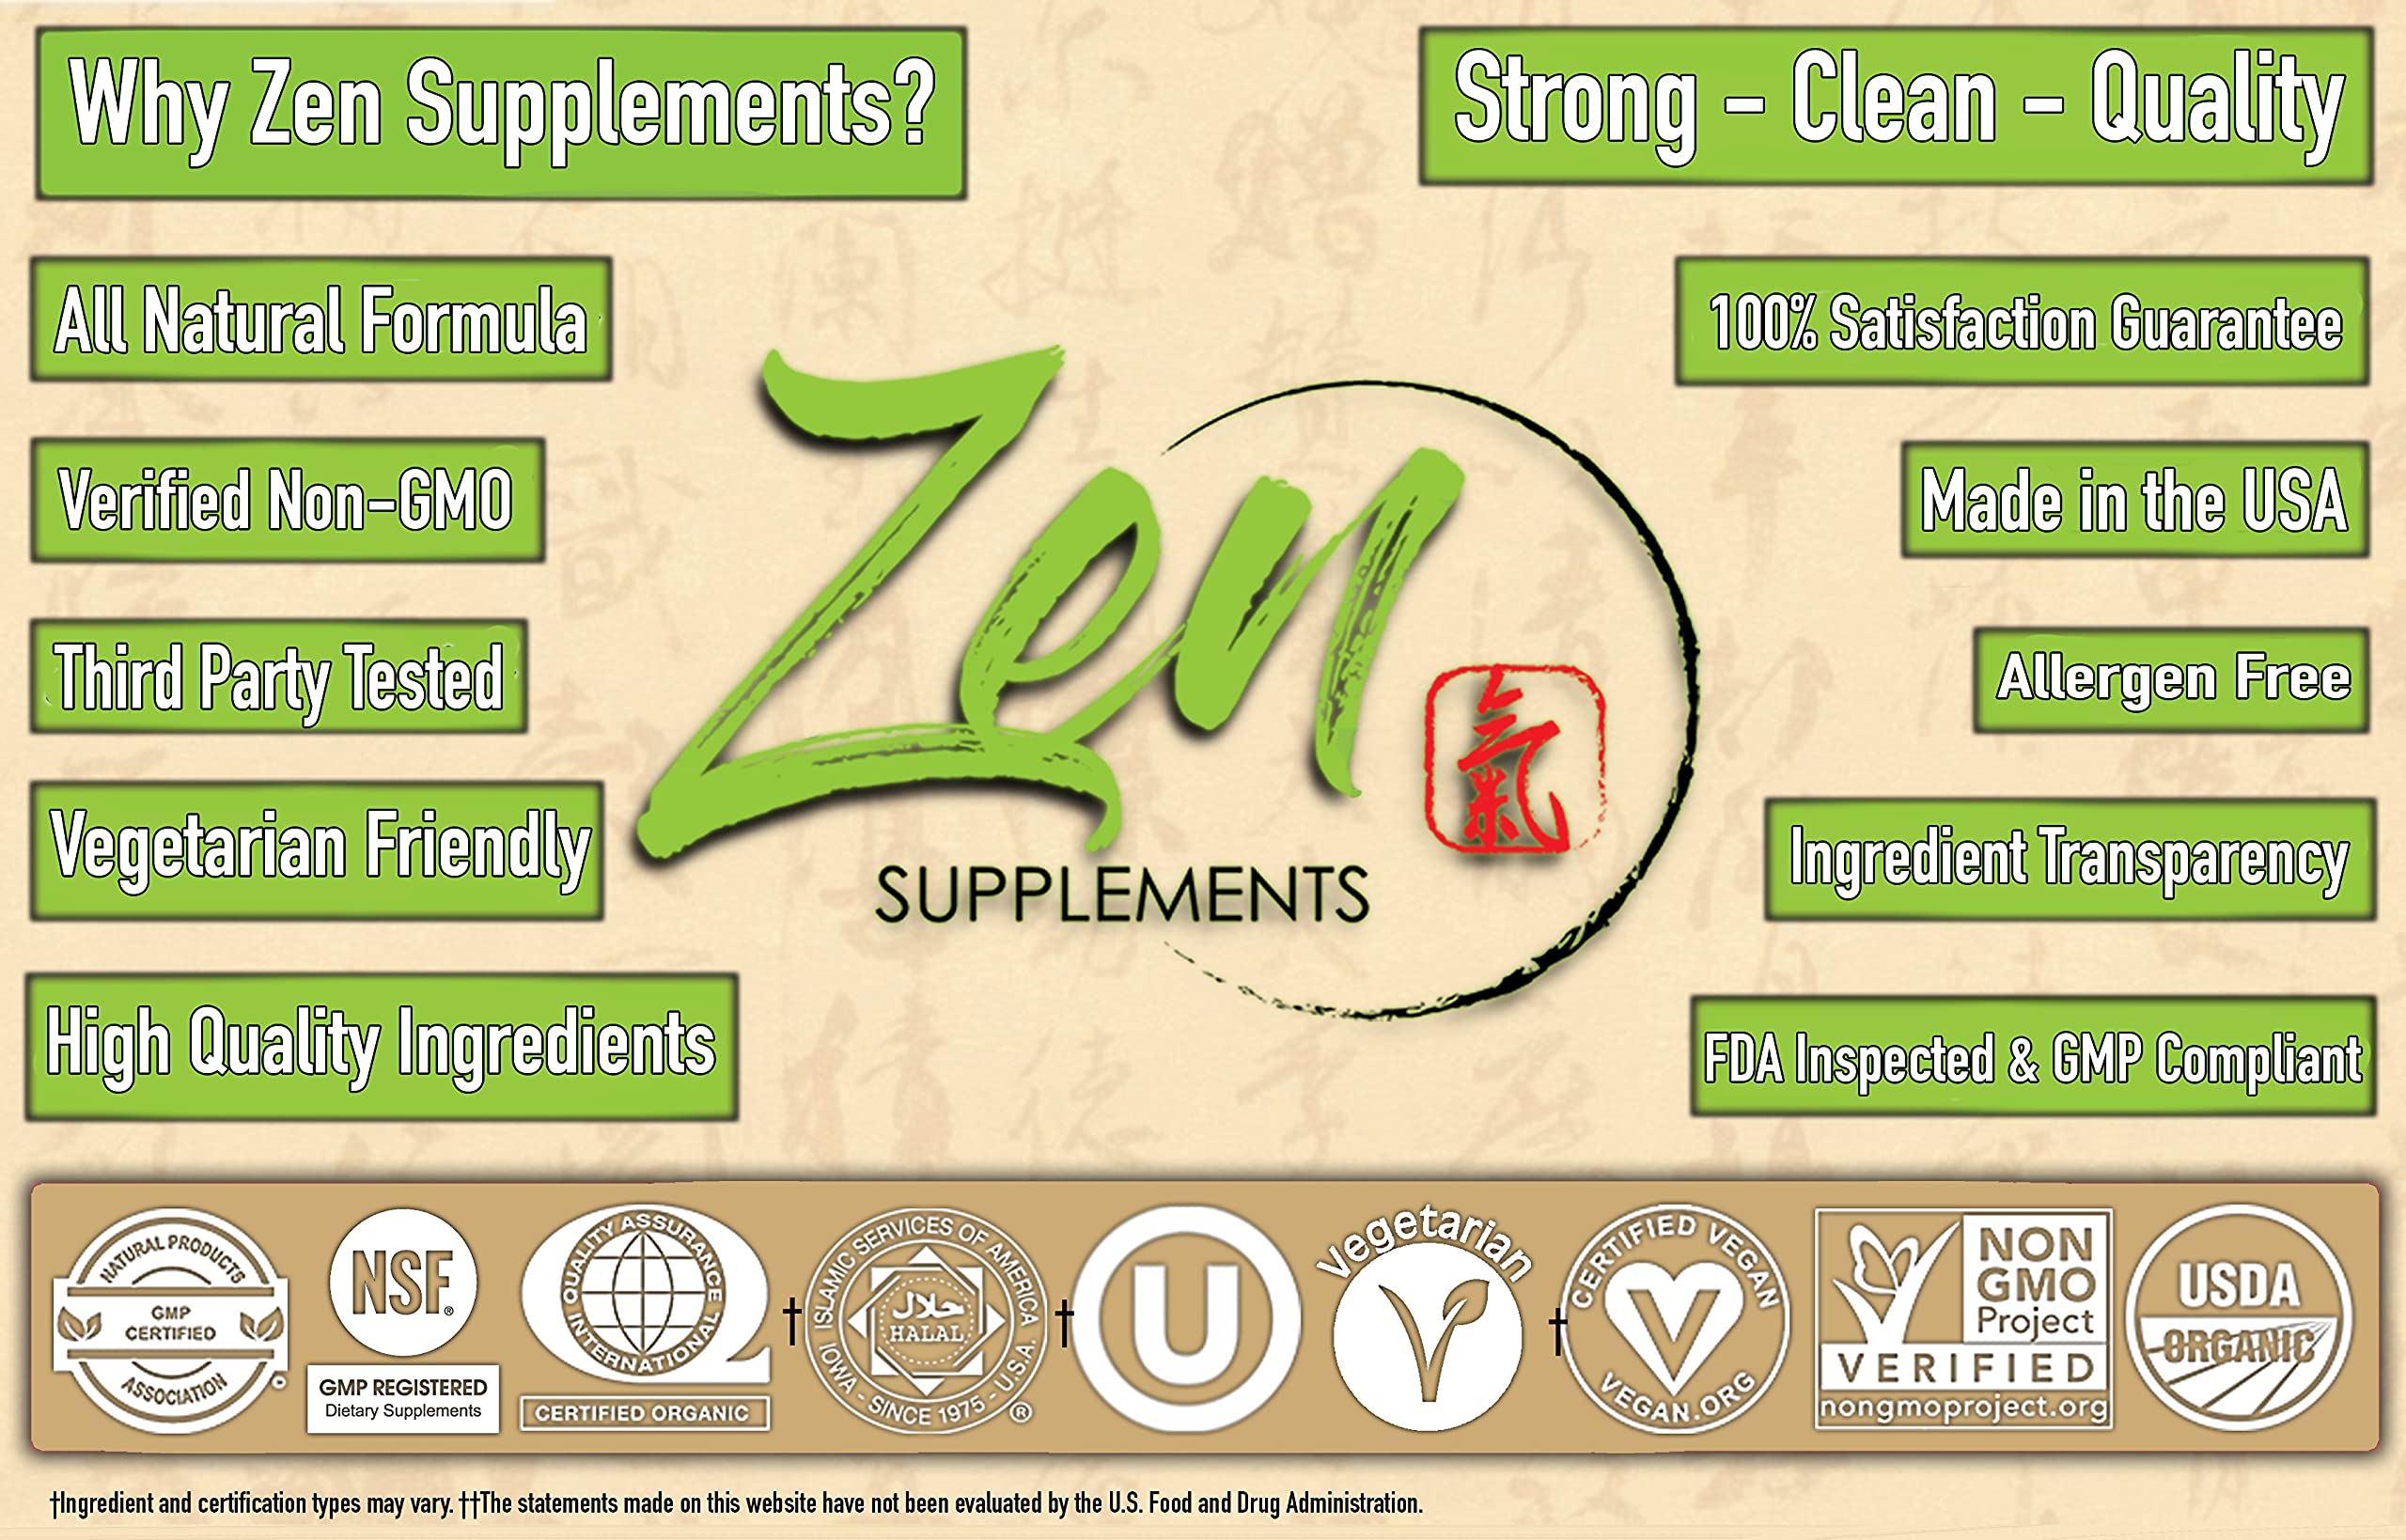 Zen Supplements - Clearfiber - Supports a Healthy Gut & Digestive Regularity, Feeds Good Bacteria, Ease Gas & a Complement for Probiotics 10 Oz-Powder